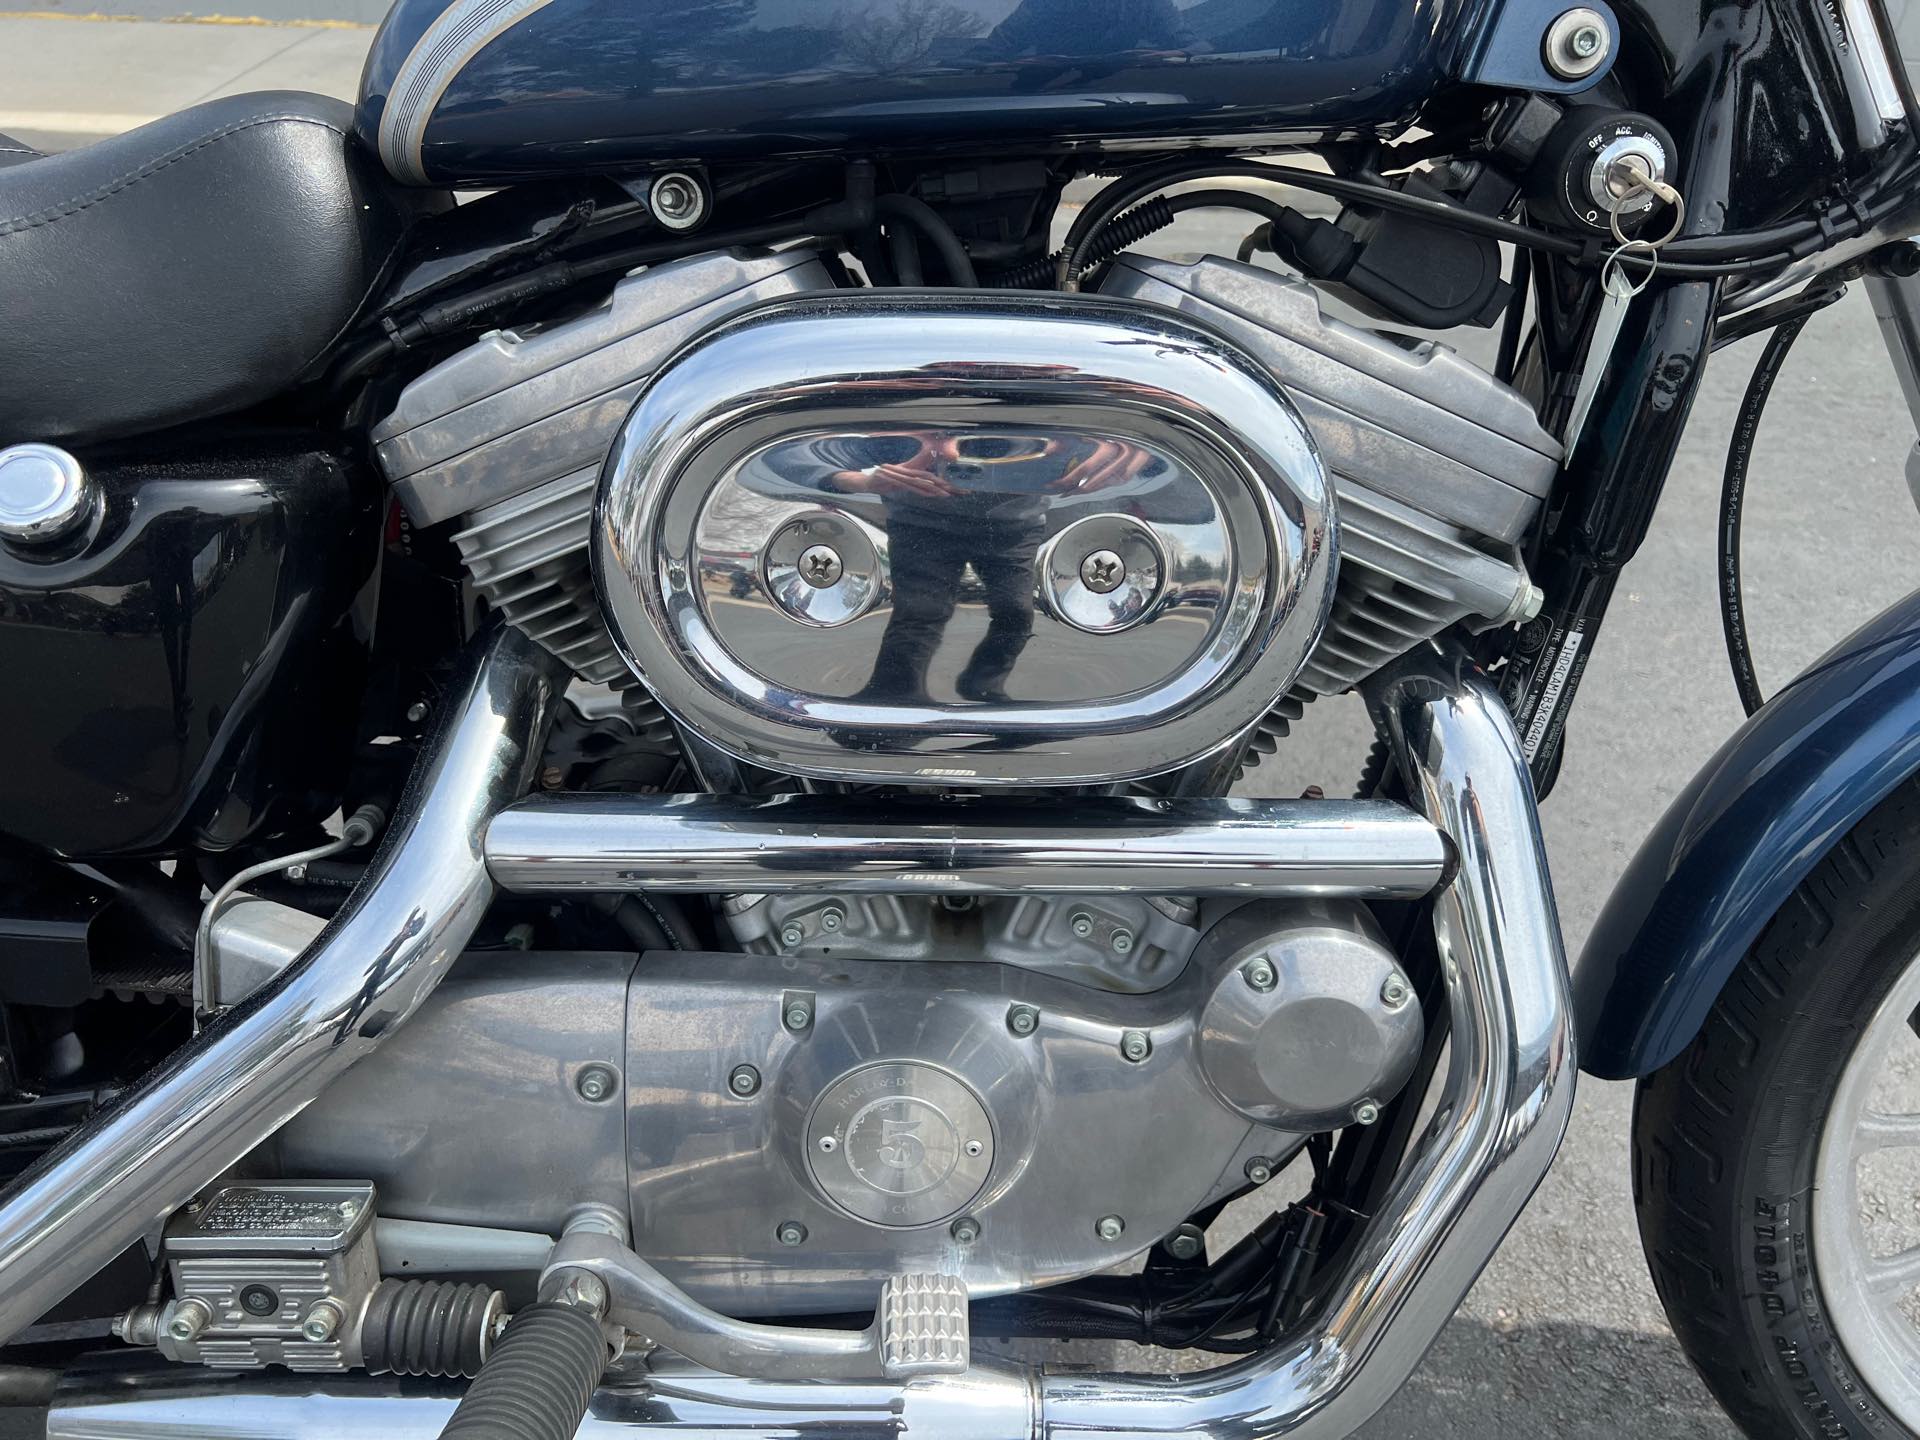 2003 Harley-Davidson XL883 at Aces Motorcycles - Fort Collins